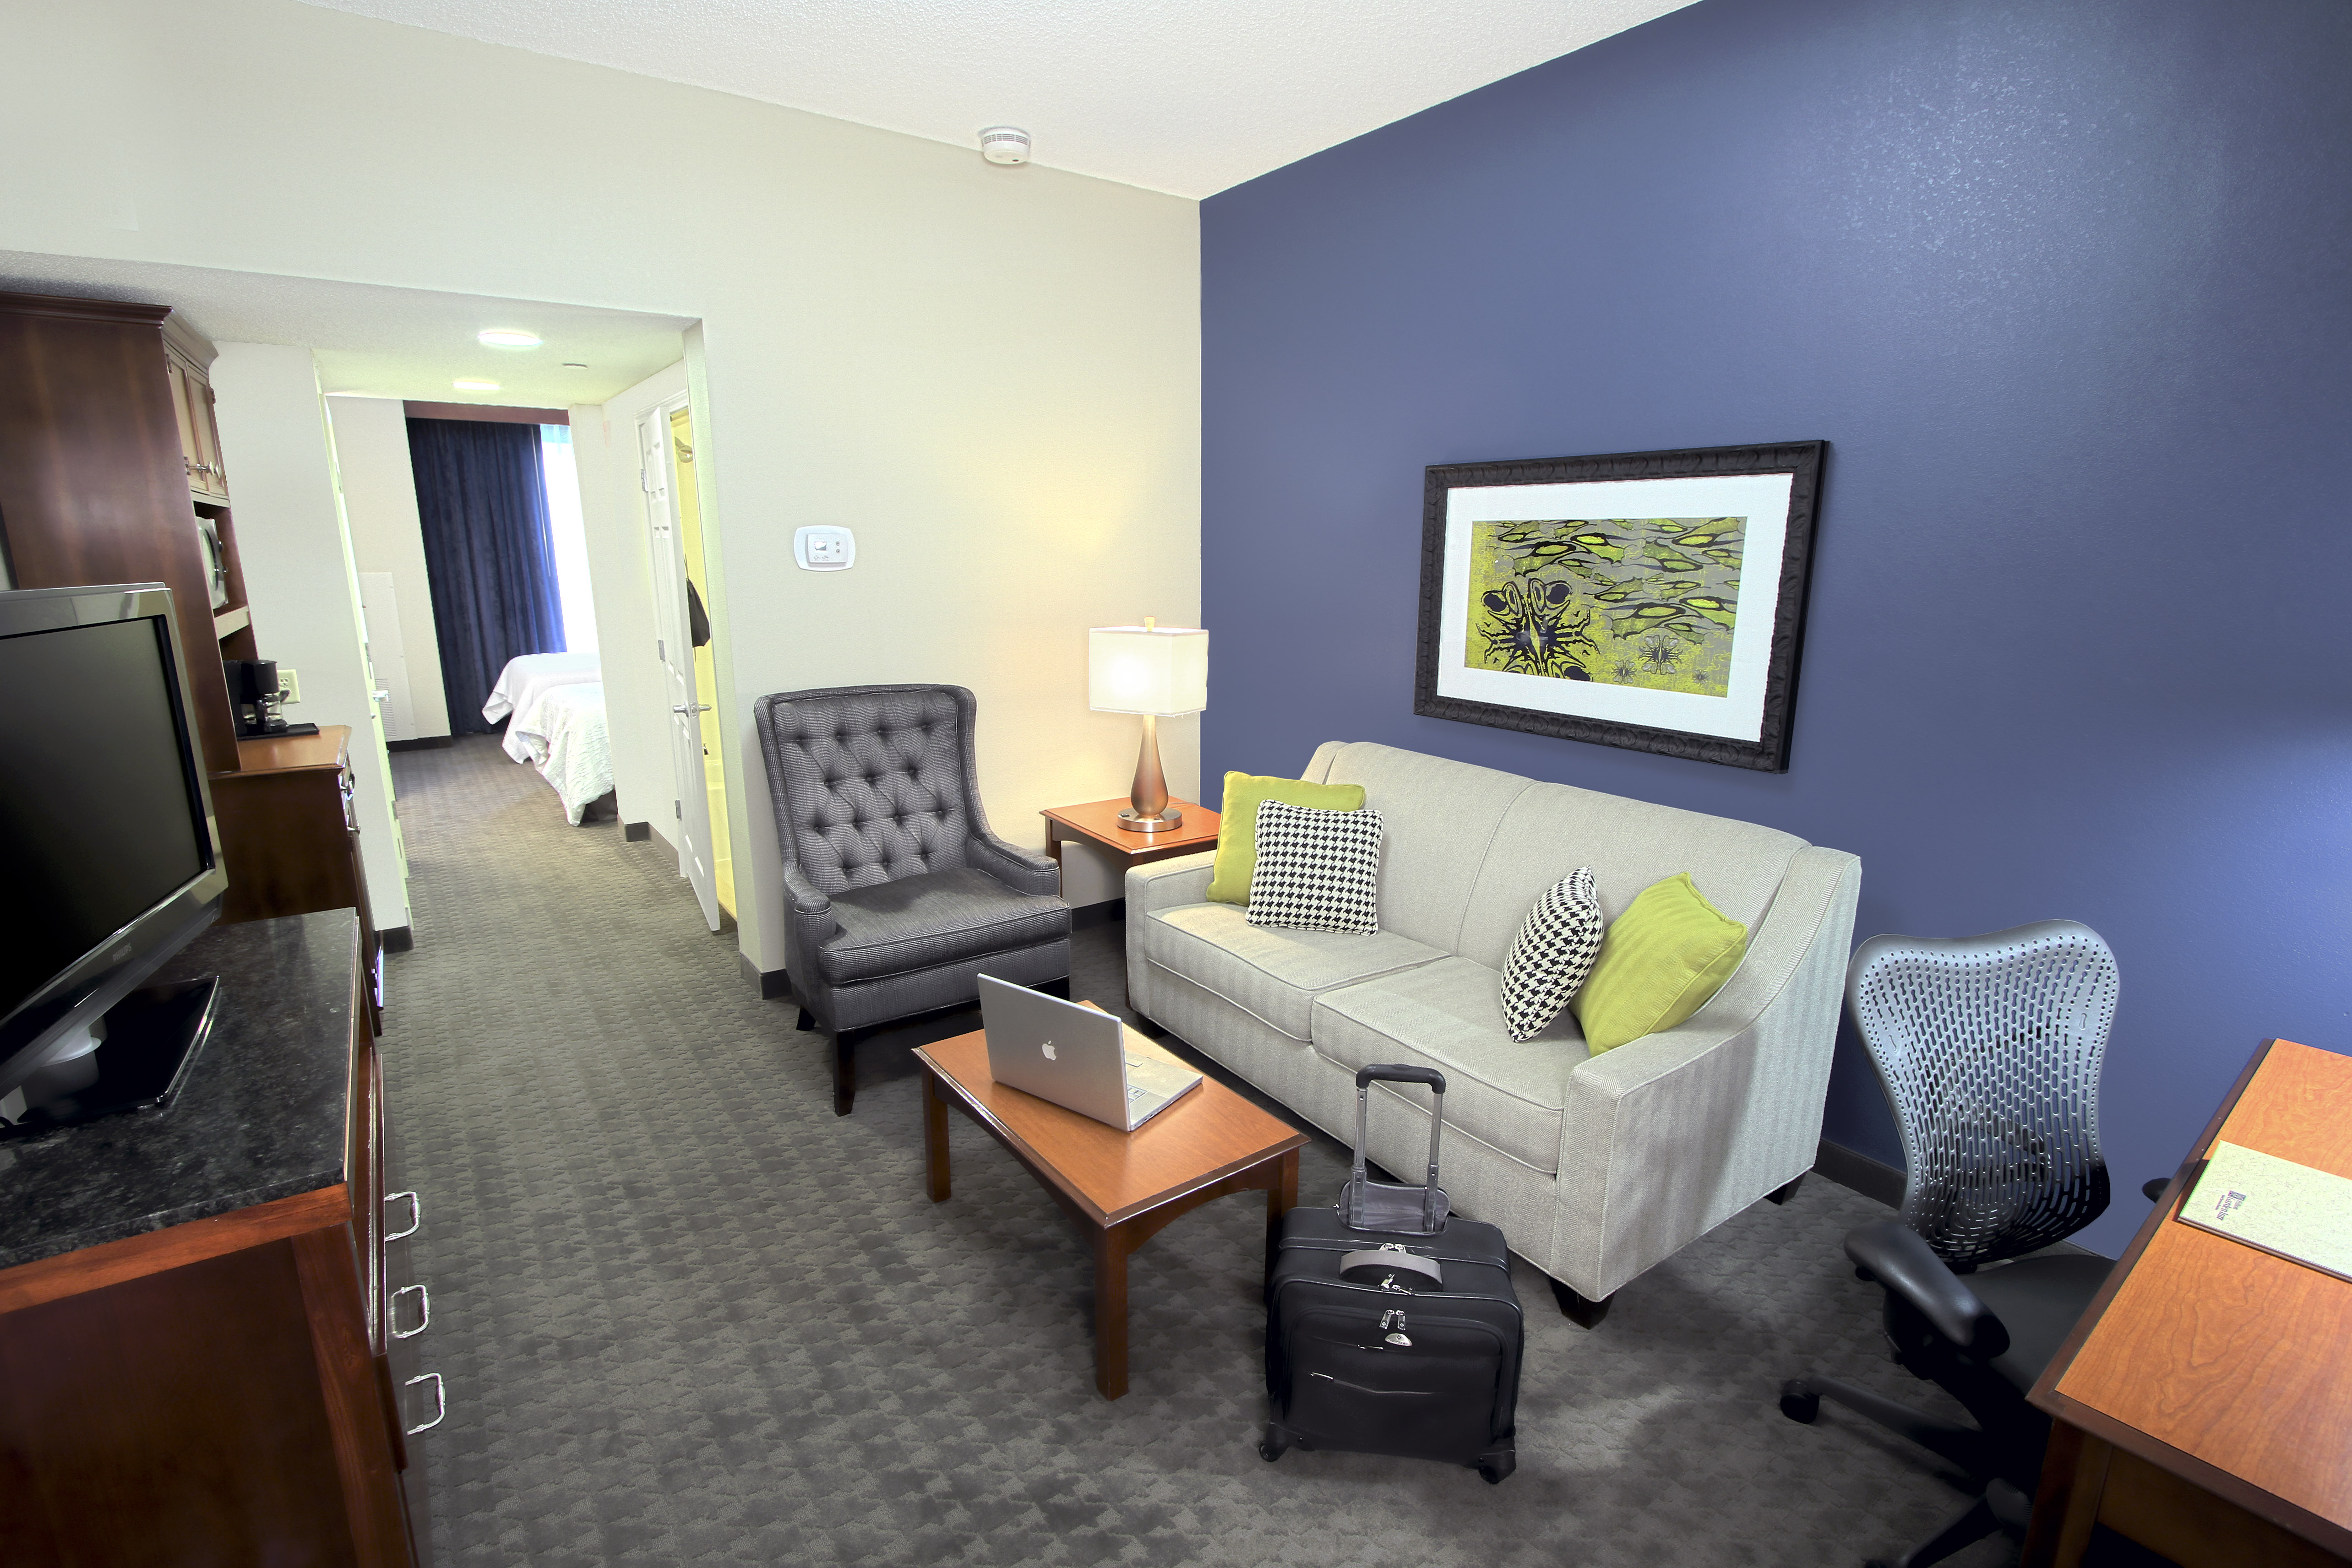 Suite Living Area With Soft Seating, Work Desk, TV, Hospitality Center, and View into Bedroom